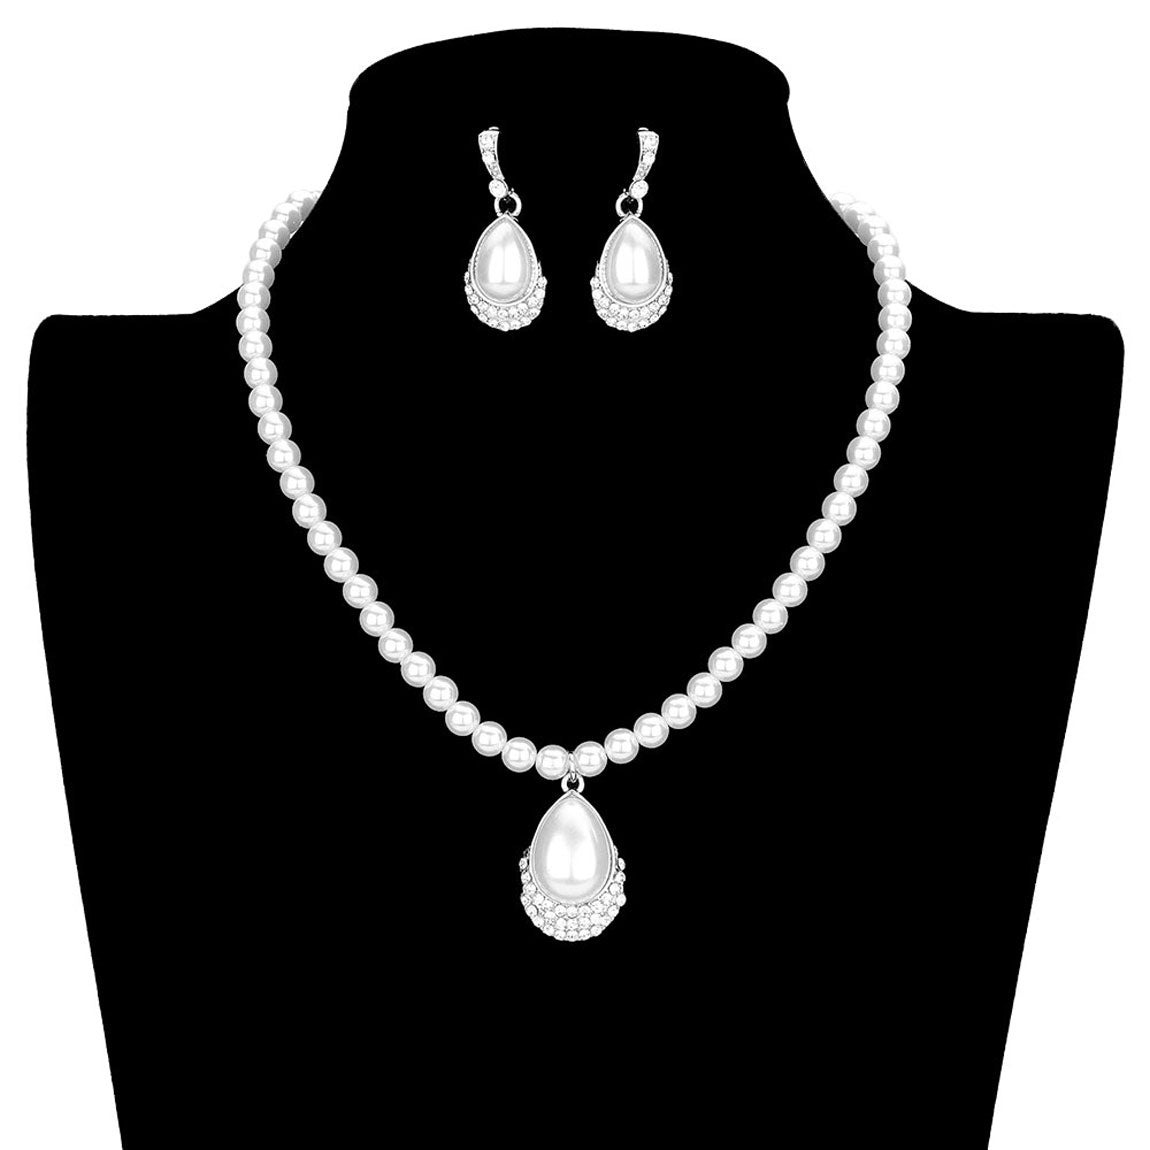 Silver White Teardrop Pendant Pearl Strand Necklace. These pearl-themed necklace earrings sets are Elegant. The beautifully crafted design adds a glow to your gorgeous outfit, a necklace that will create your glamorous look. Suitable for wear Party, Wedding, Engagement, Anniversary, Date Night, or any special events. Perfect Birthday, Anniversary, Mother's Day & Graduation Gift, Prom Jewelry, Just Because Gift, Thank you, Gift.